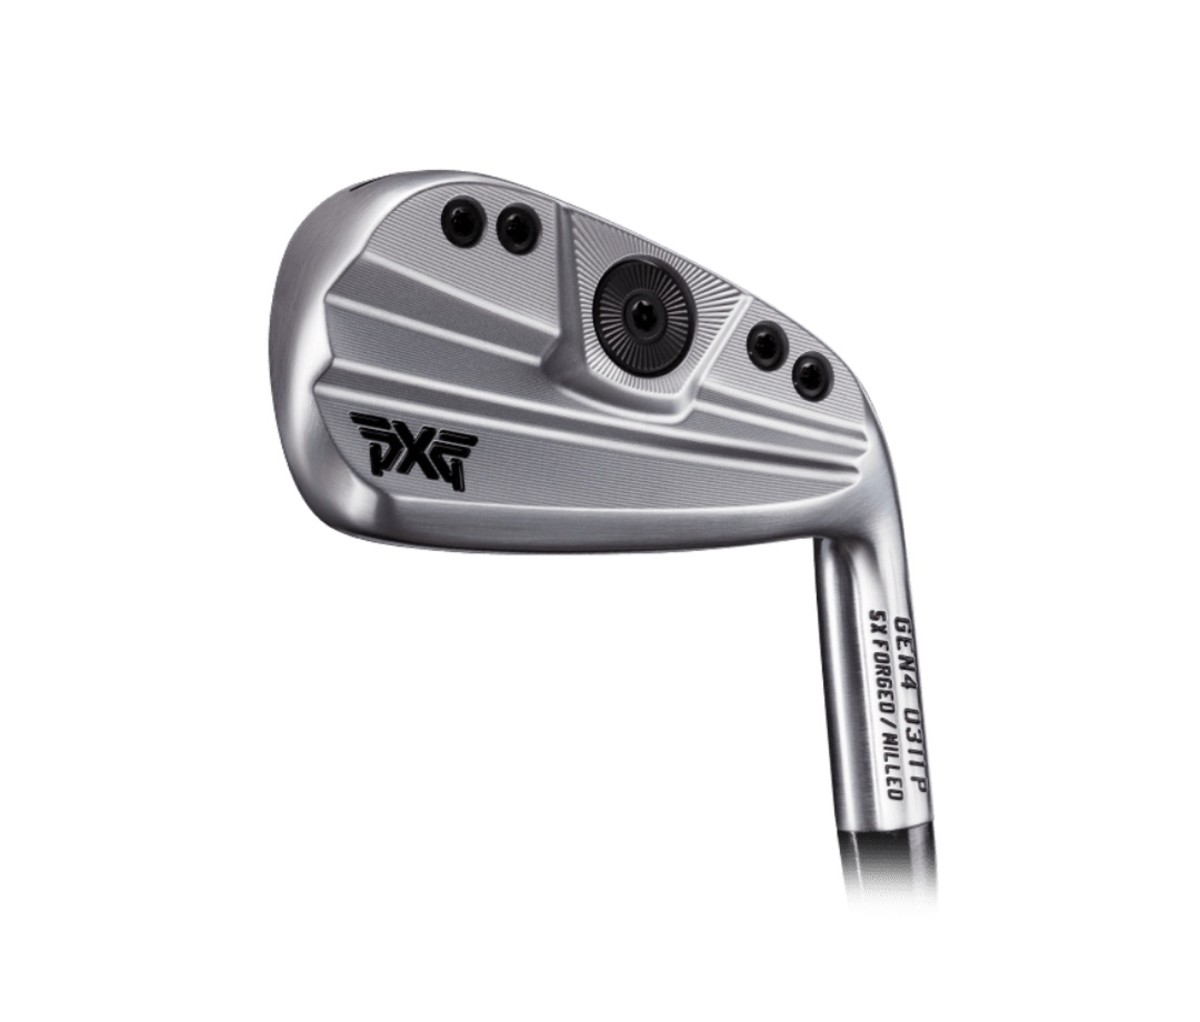 PXG Gen 4 Irons golf clubs have three models to suit every player.